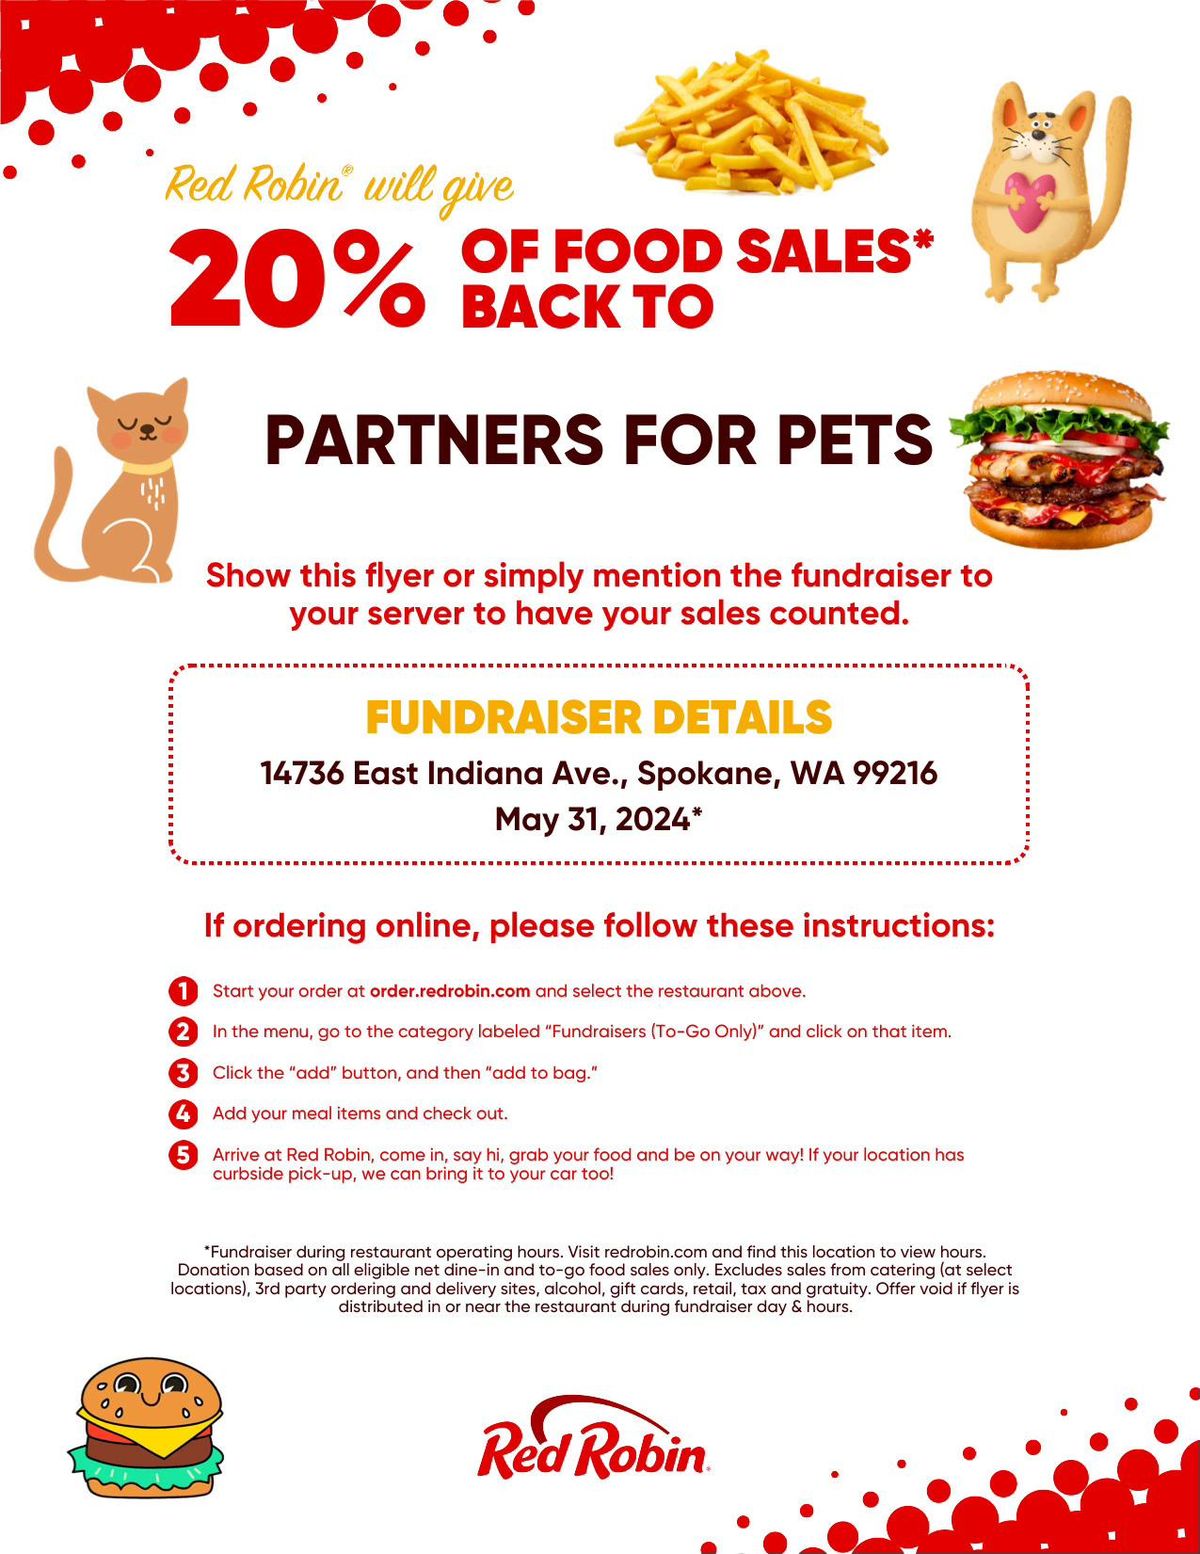 Red Robin Fundraiser for Partners for Pets!